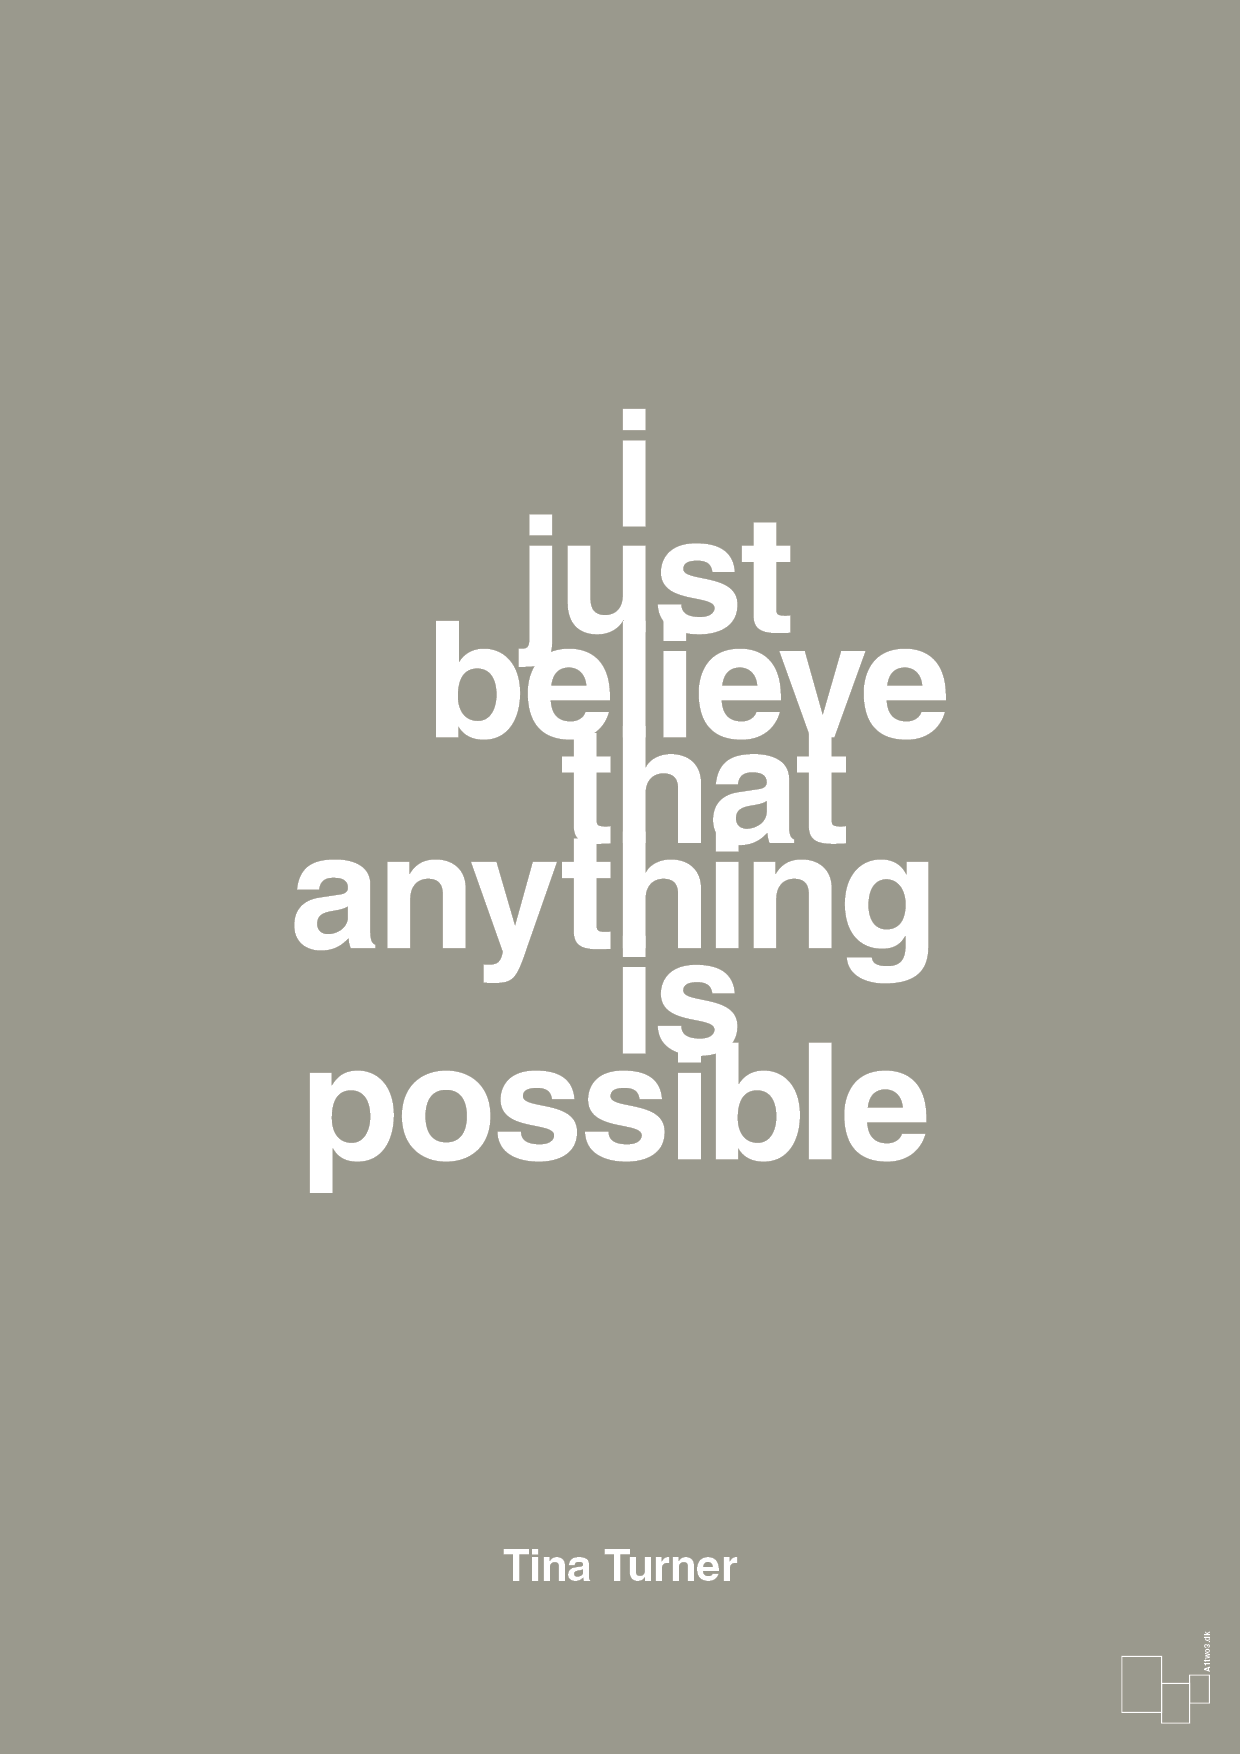 i just believe that anything is possible - Plakat med Citater i Battleship Gray